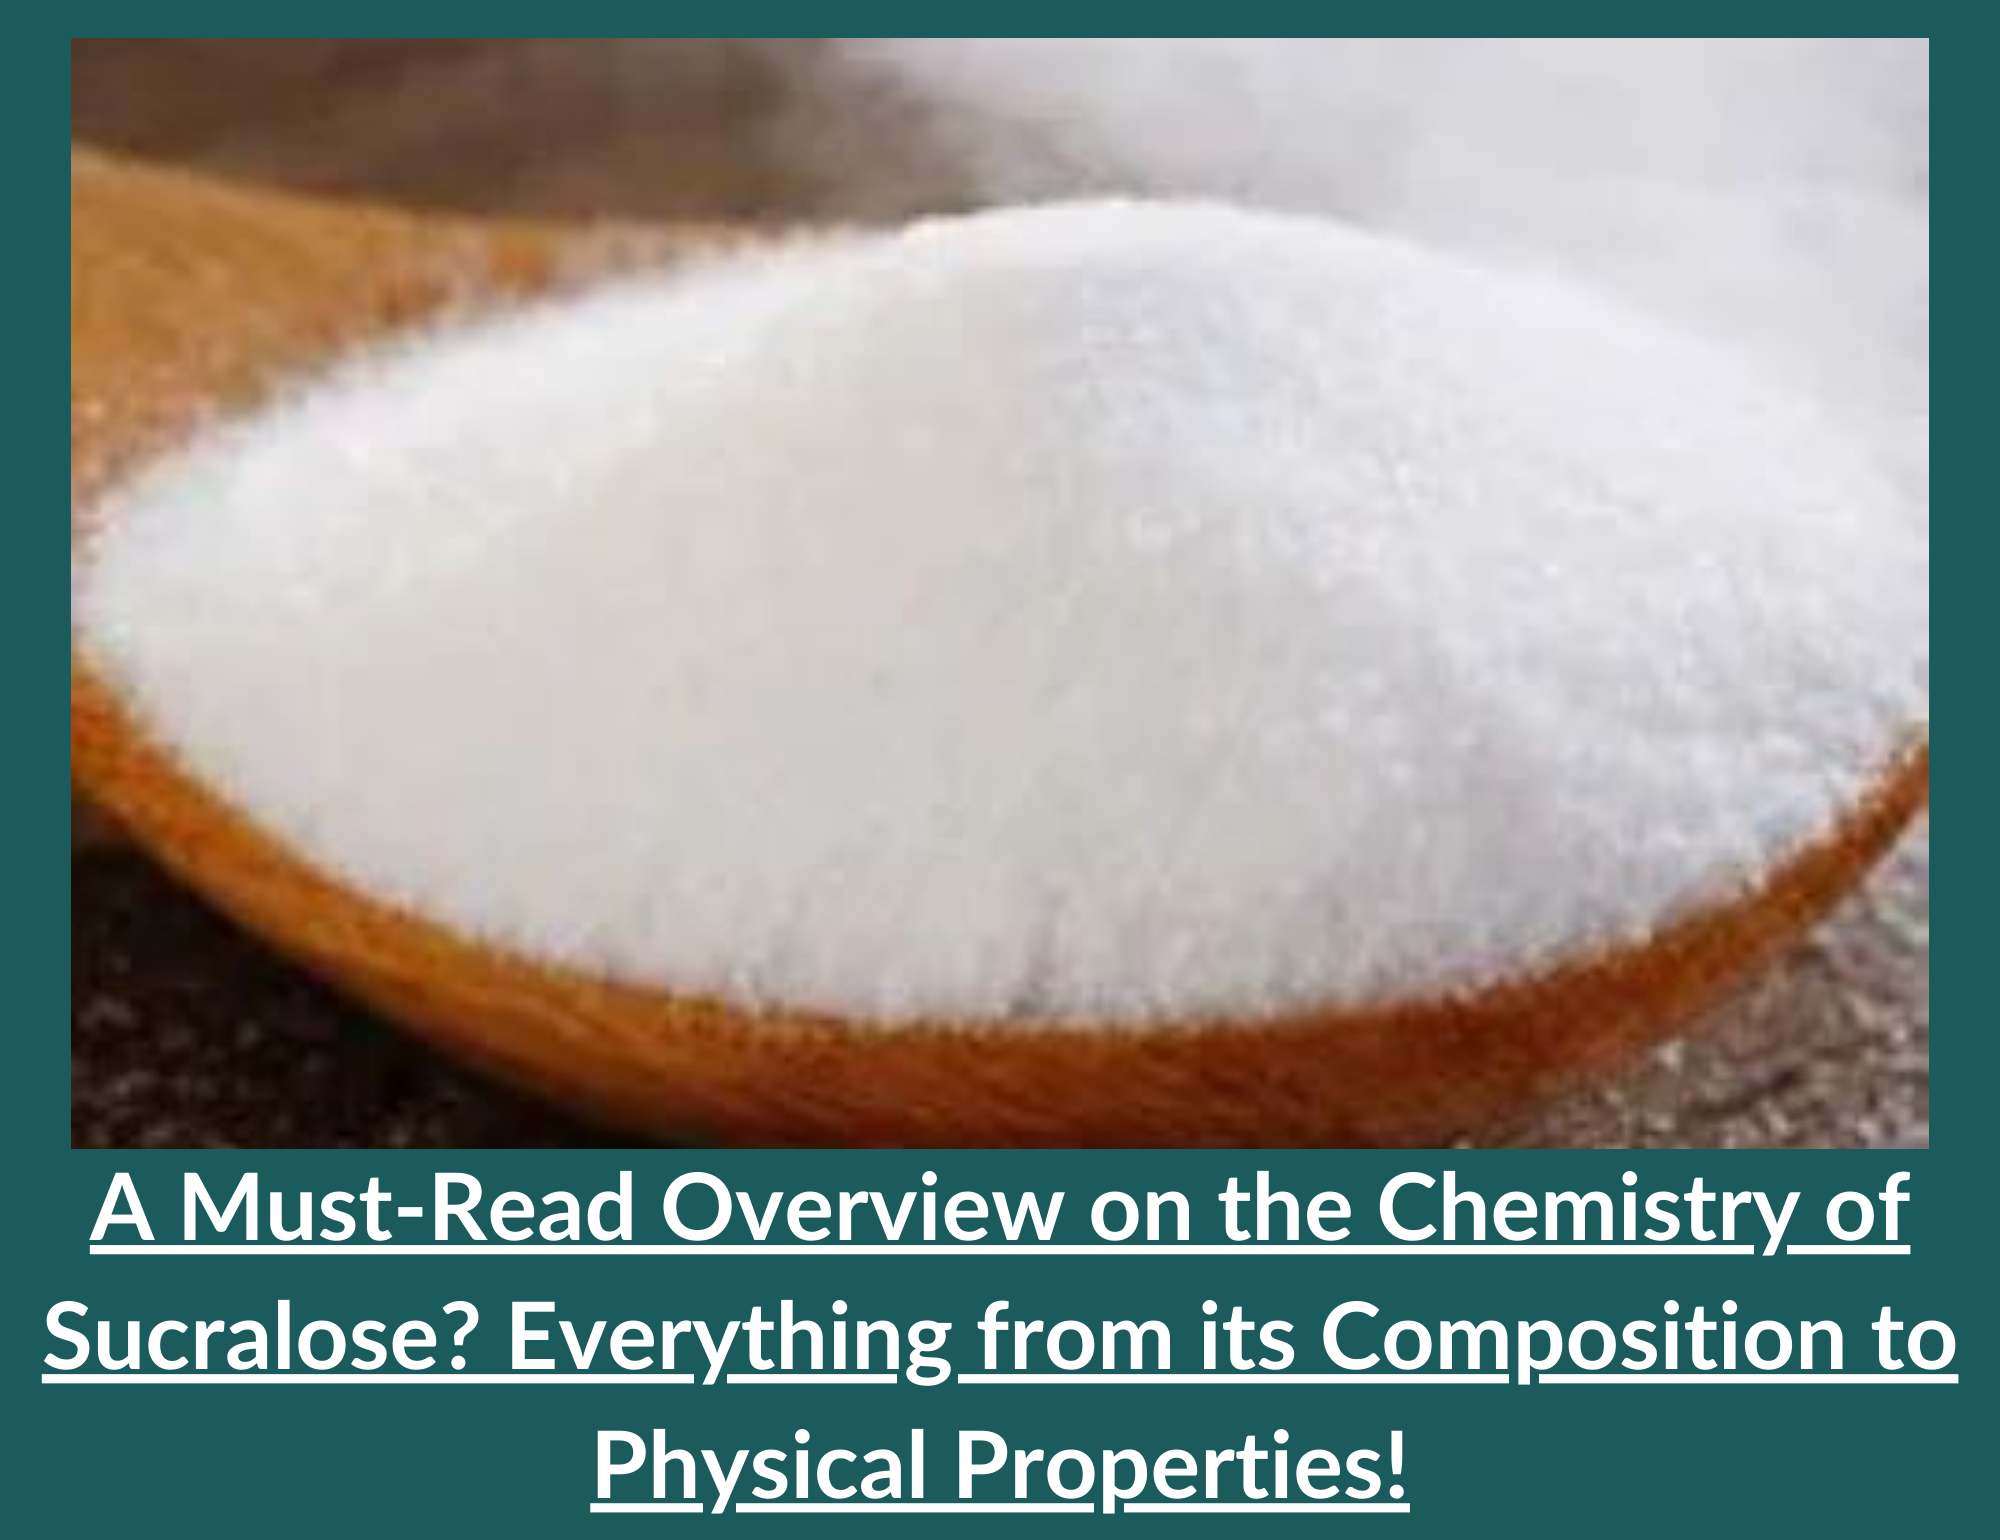 Sucralose Composition and Physical Properties